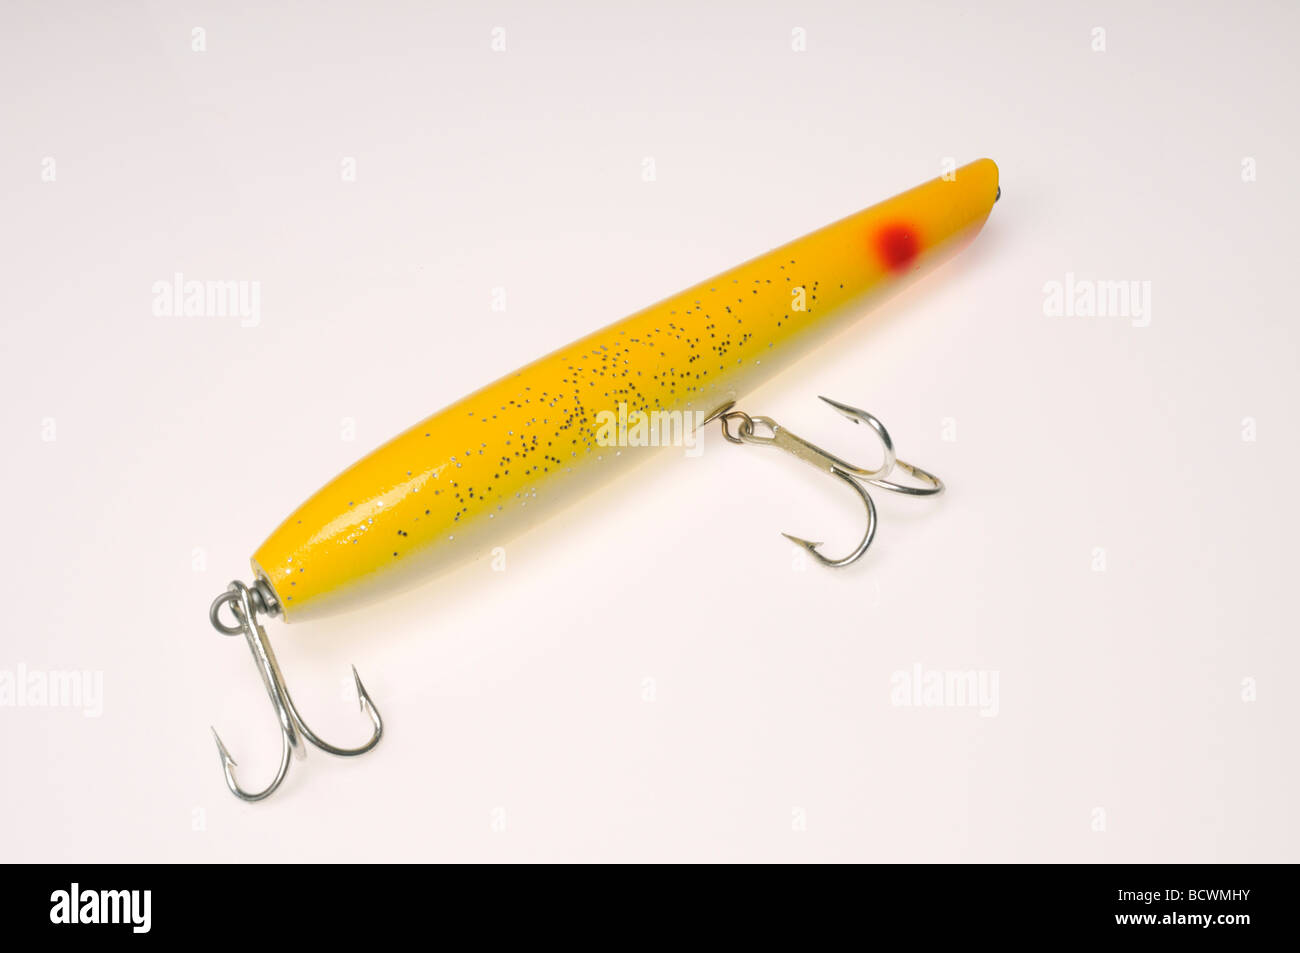 https://c8.alamy.com/comp/BCWMHY/fishing-lure-for-saltwater-with-treble-hooks-BCWMHY.jpg